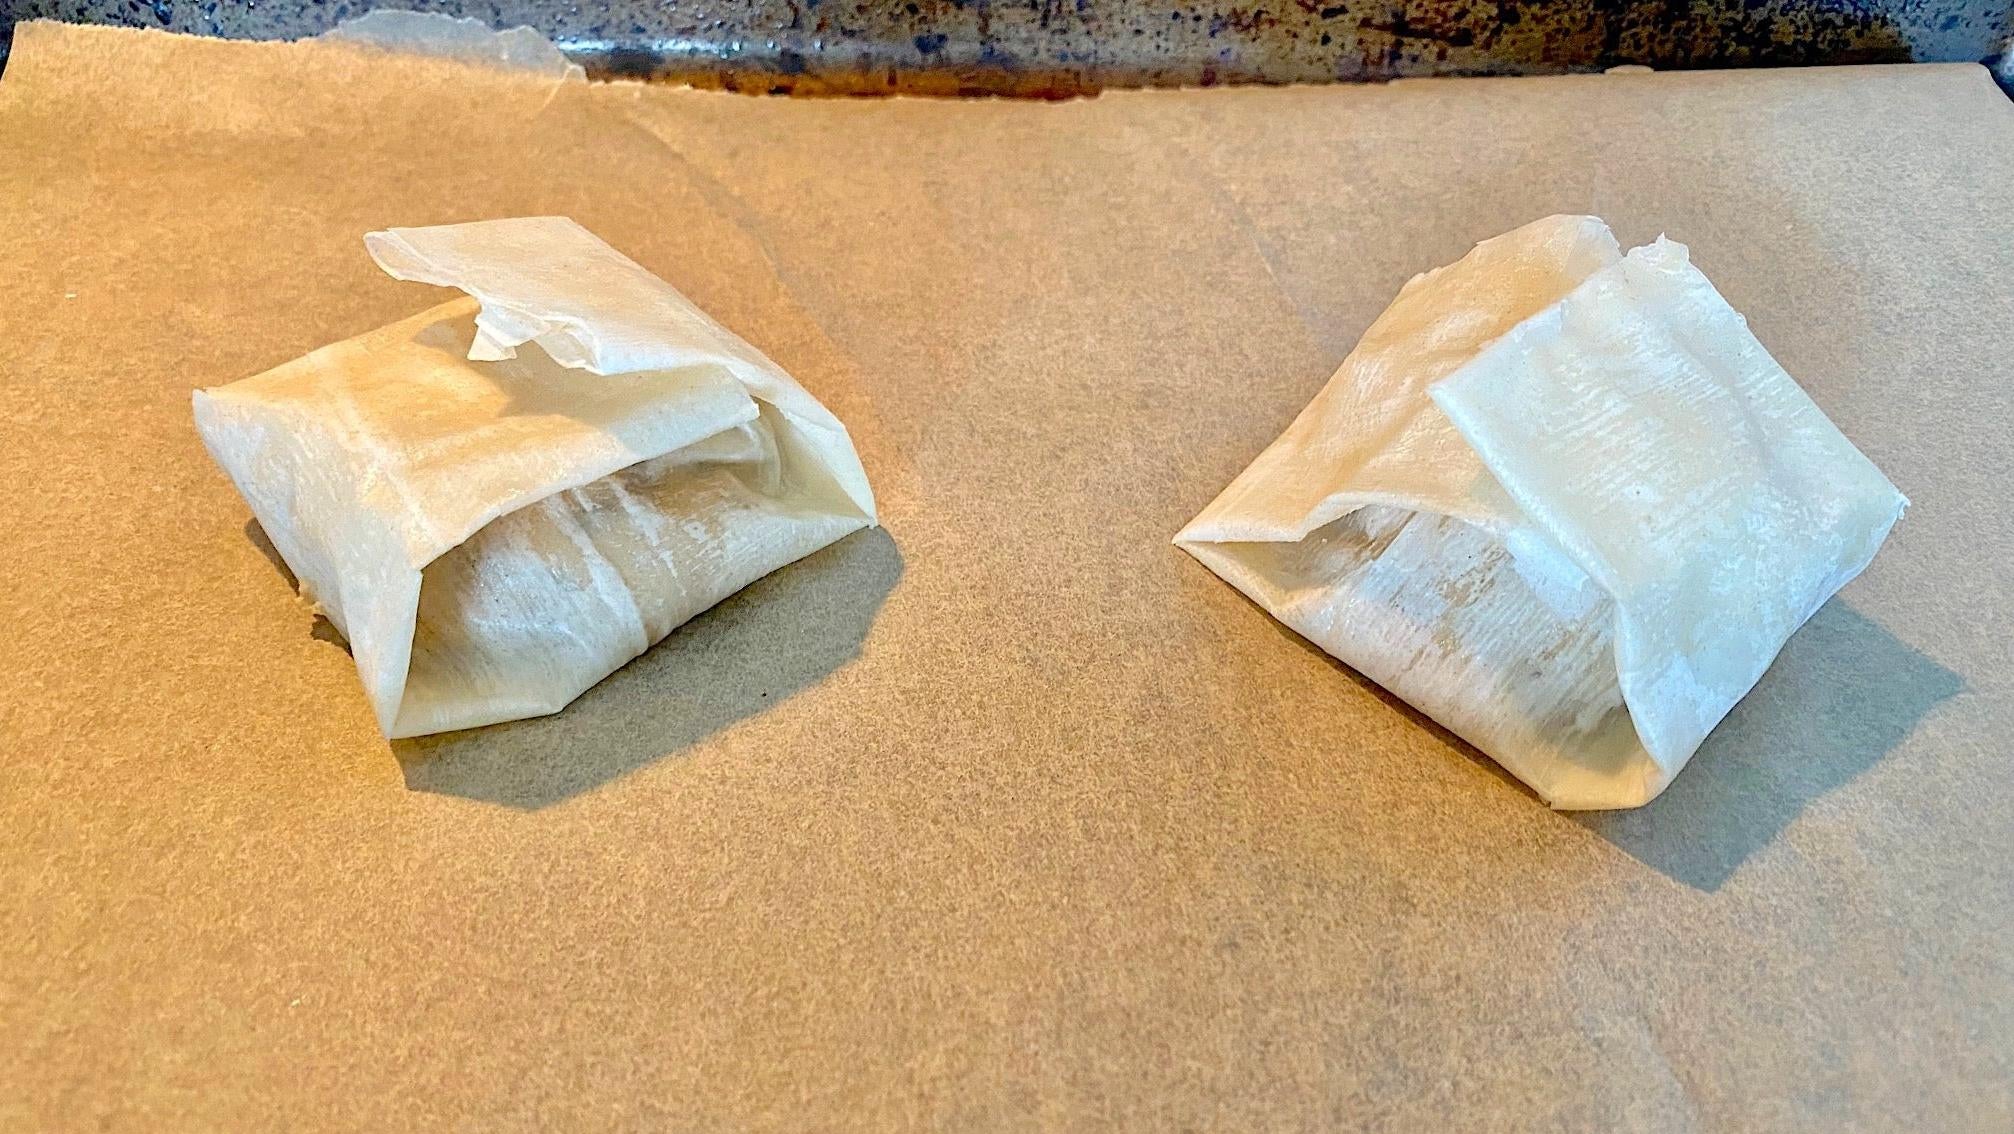 Loosely wrapped phyllo. (Photo: Allie Chanthorn Reinmann)